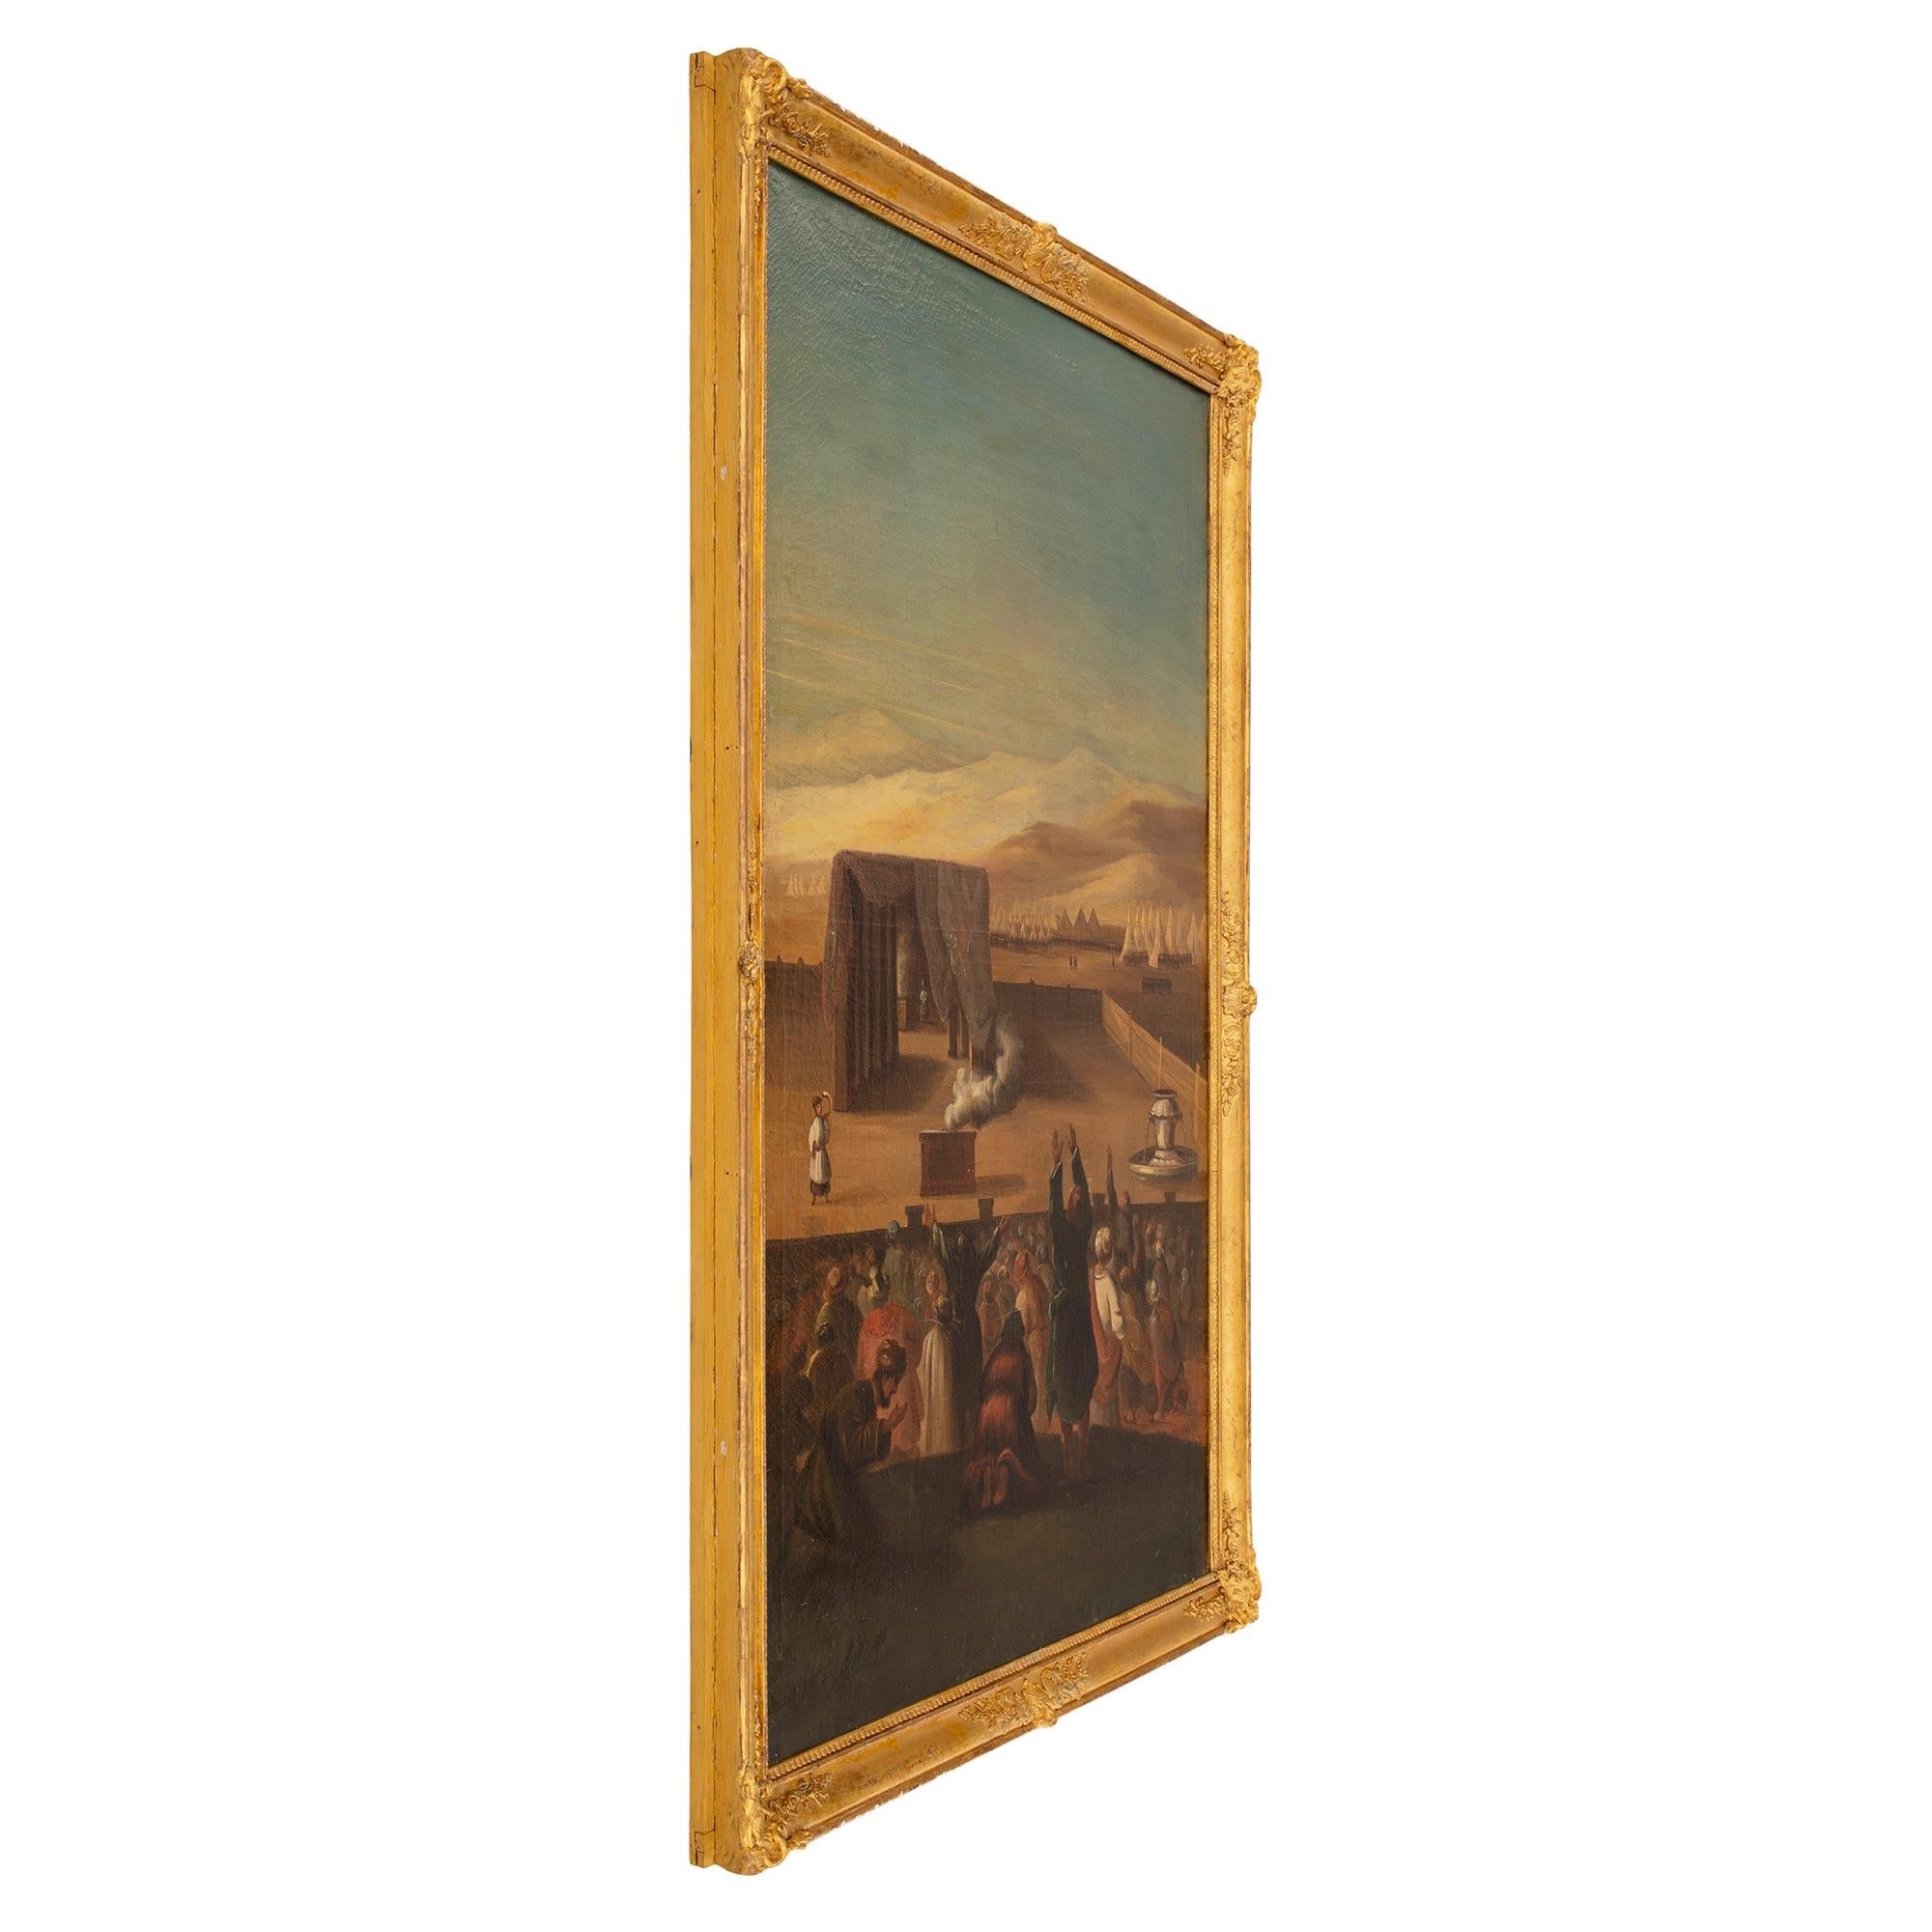 A striking Italian 19th century oil on canvas painting in its original giltwood frame. The painting is framed within a beautiful and most elegant mottled giltwood border with a fine Coeur de Rai band, richly carved charming floral movements and